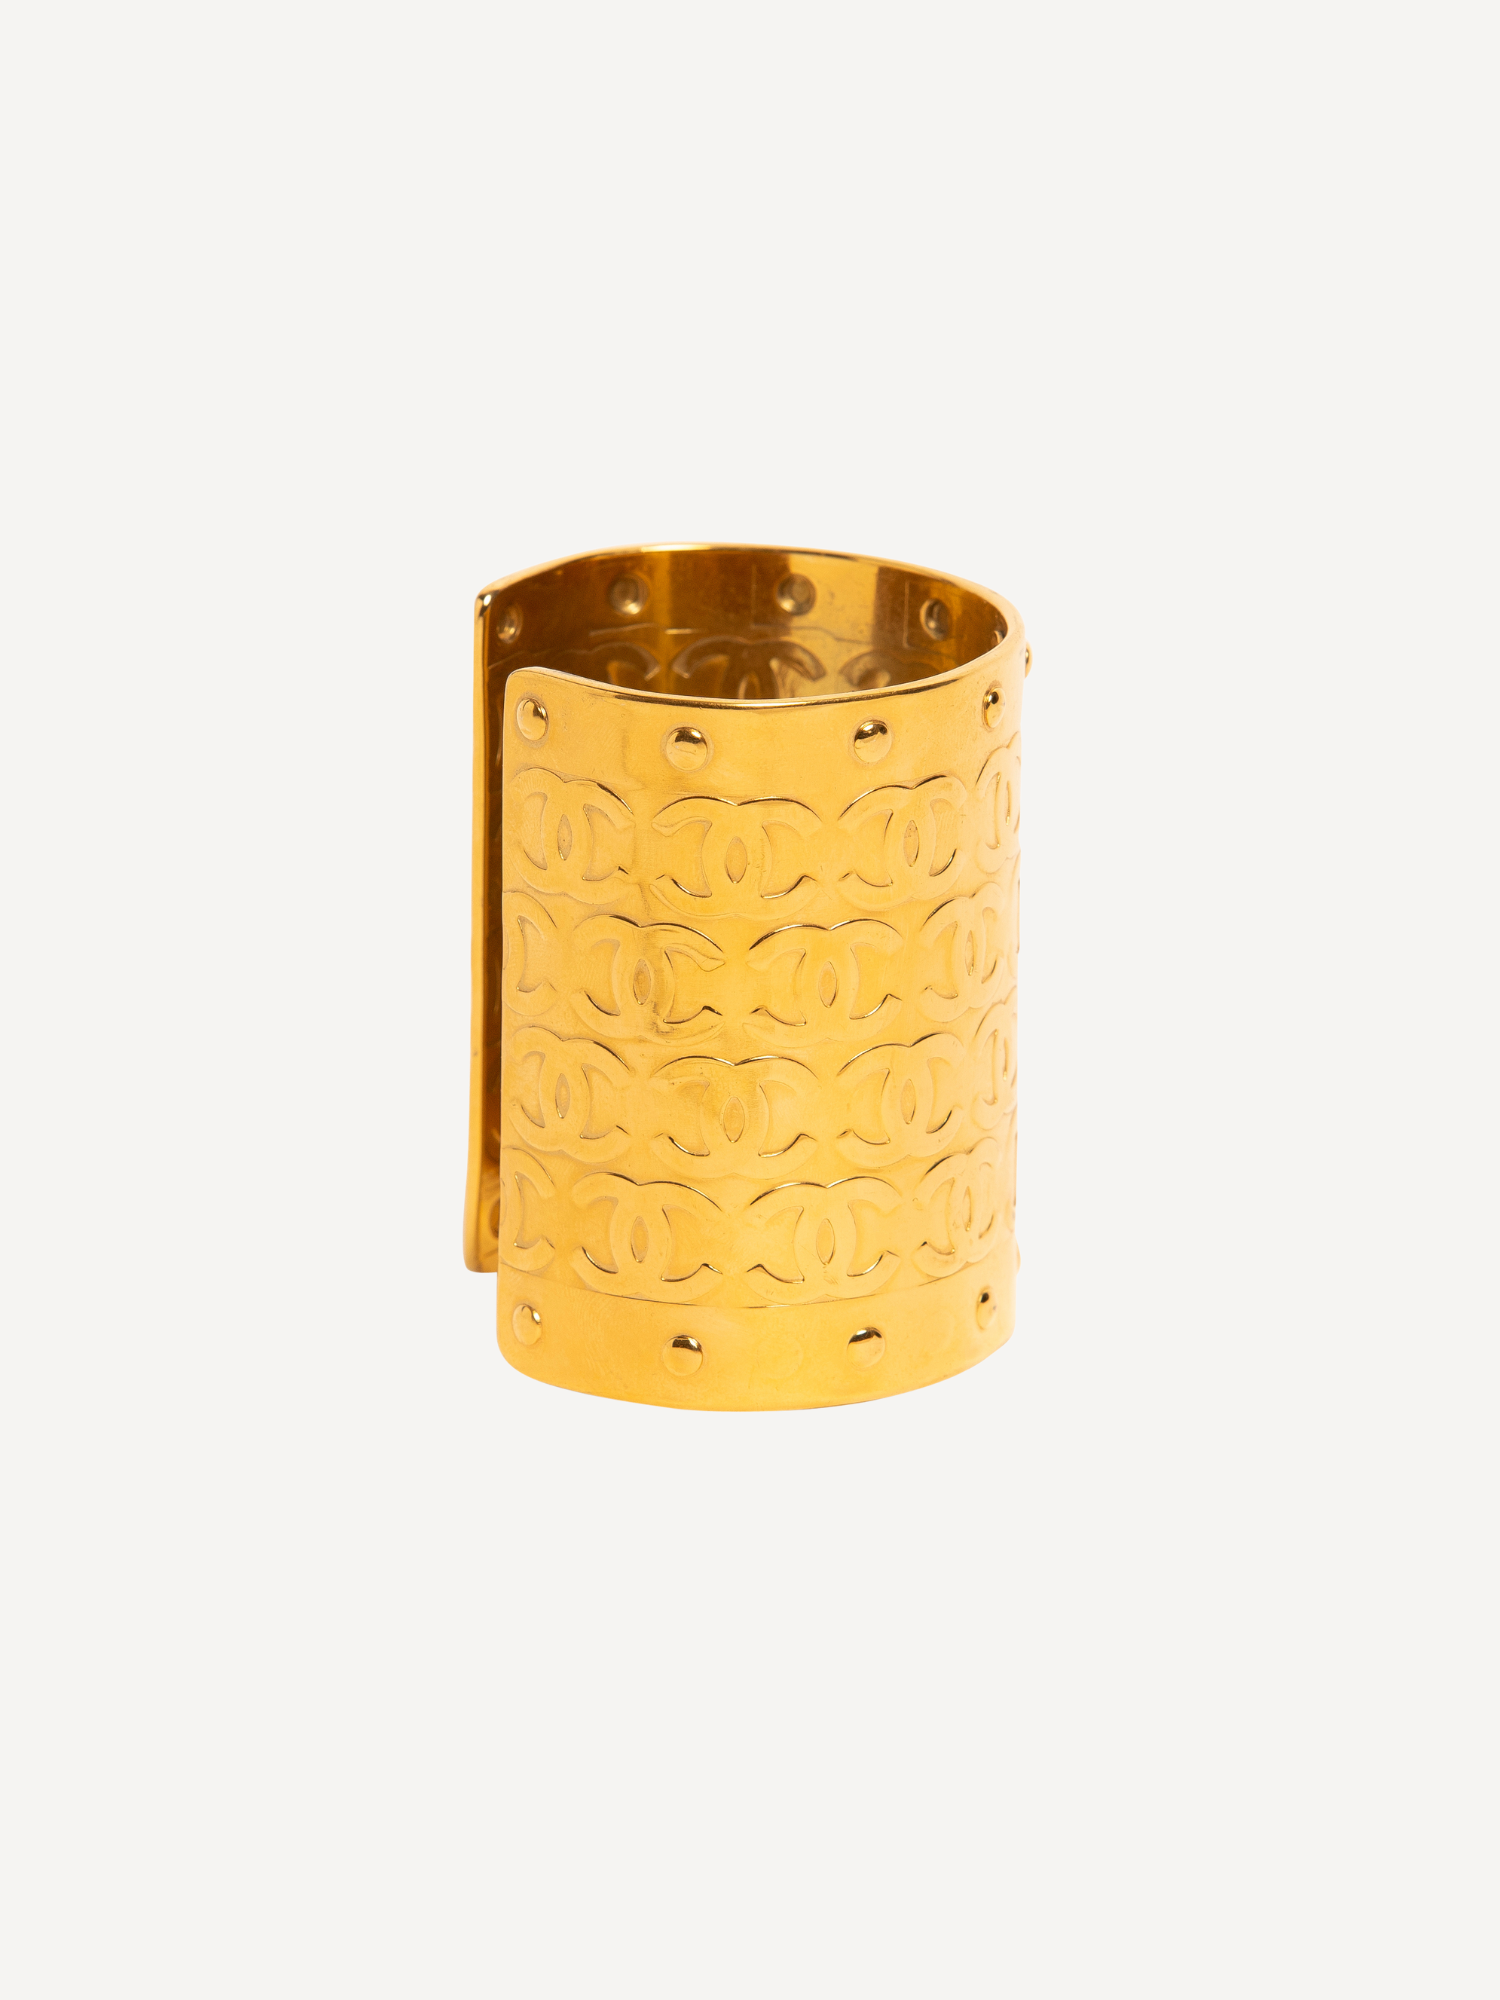 Chanel 96A Gold Plated Long Thick Cuff Bracelet